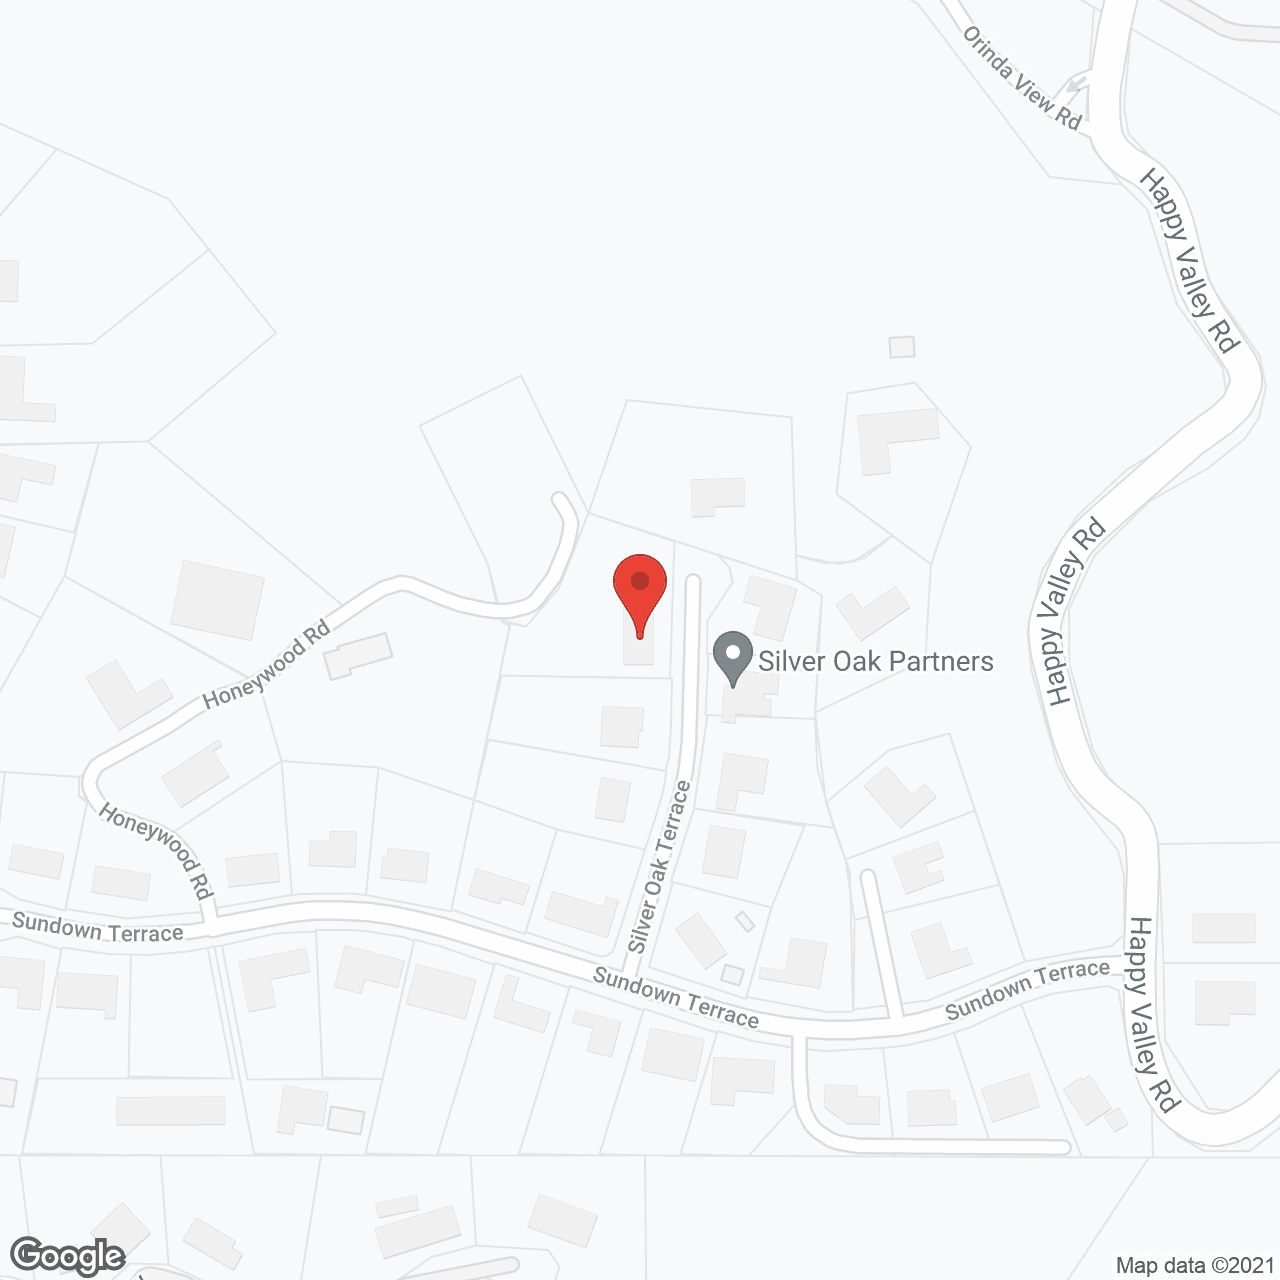 Stamm Care Homes in google map